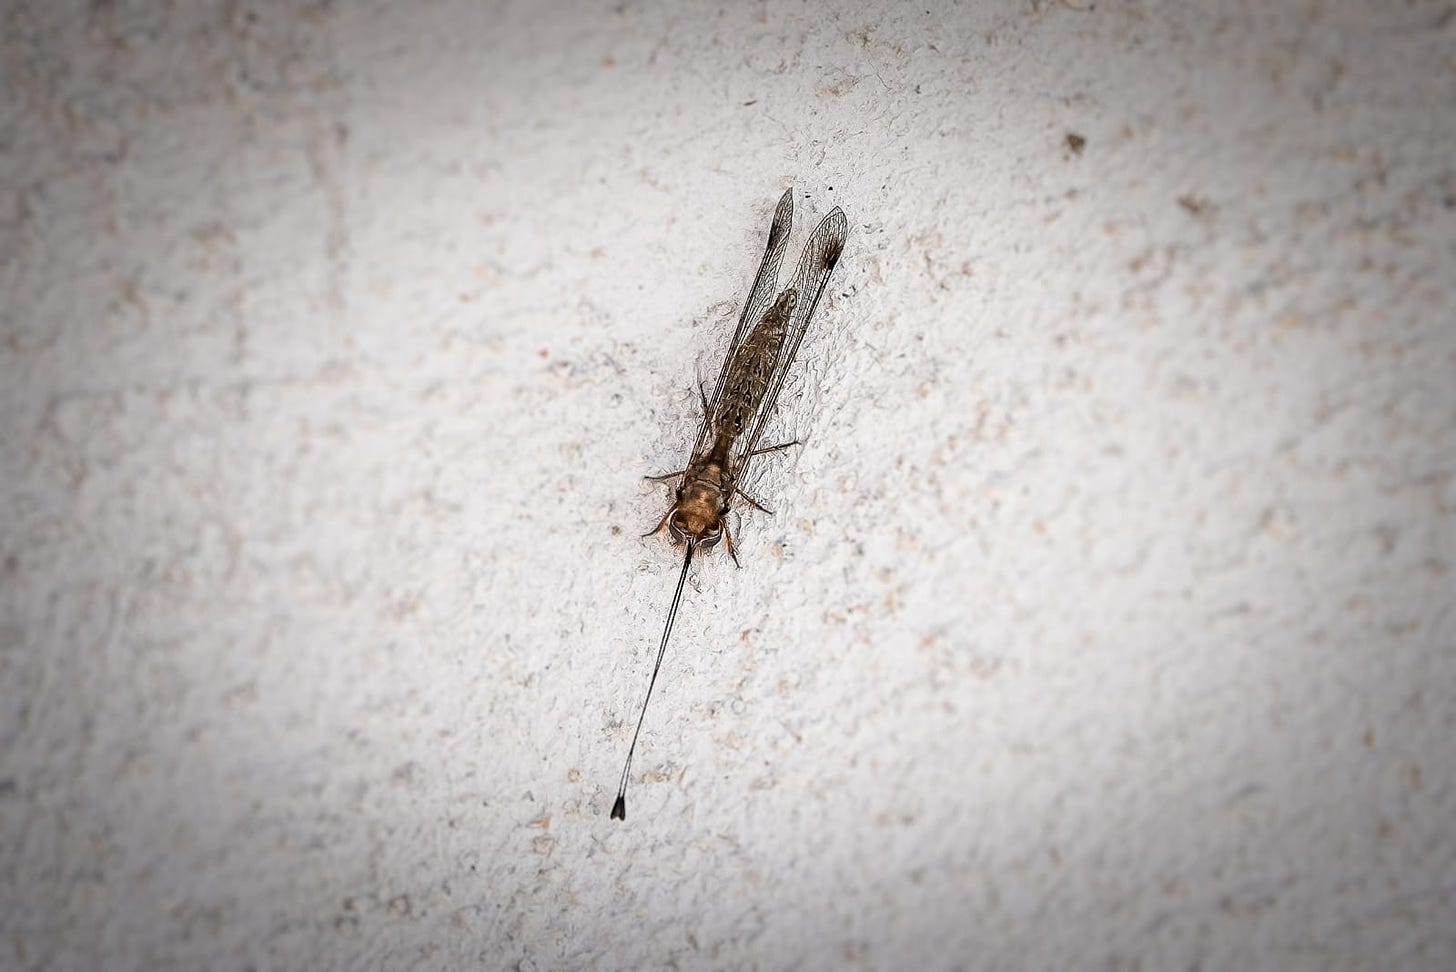 A long but with transparent lacy wings thin oblong body and long antennas on a rough white surface